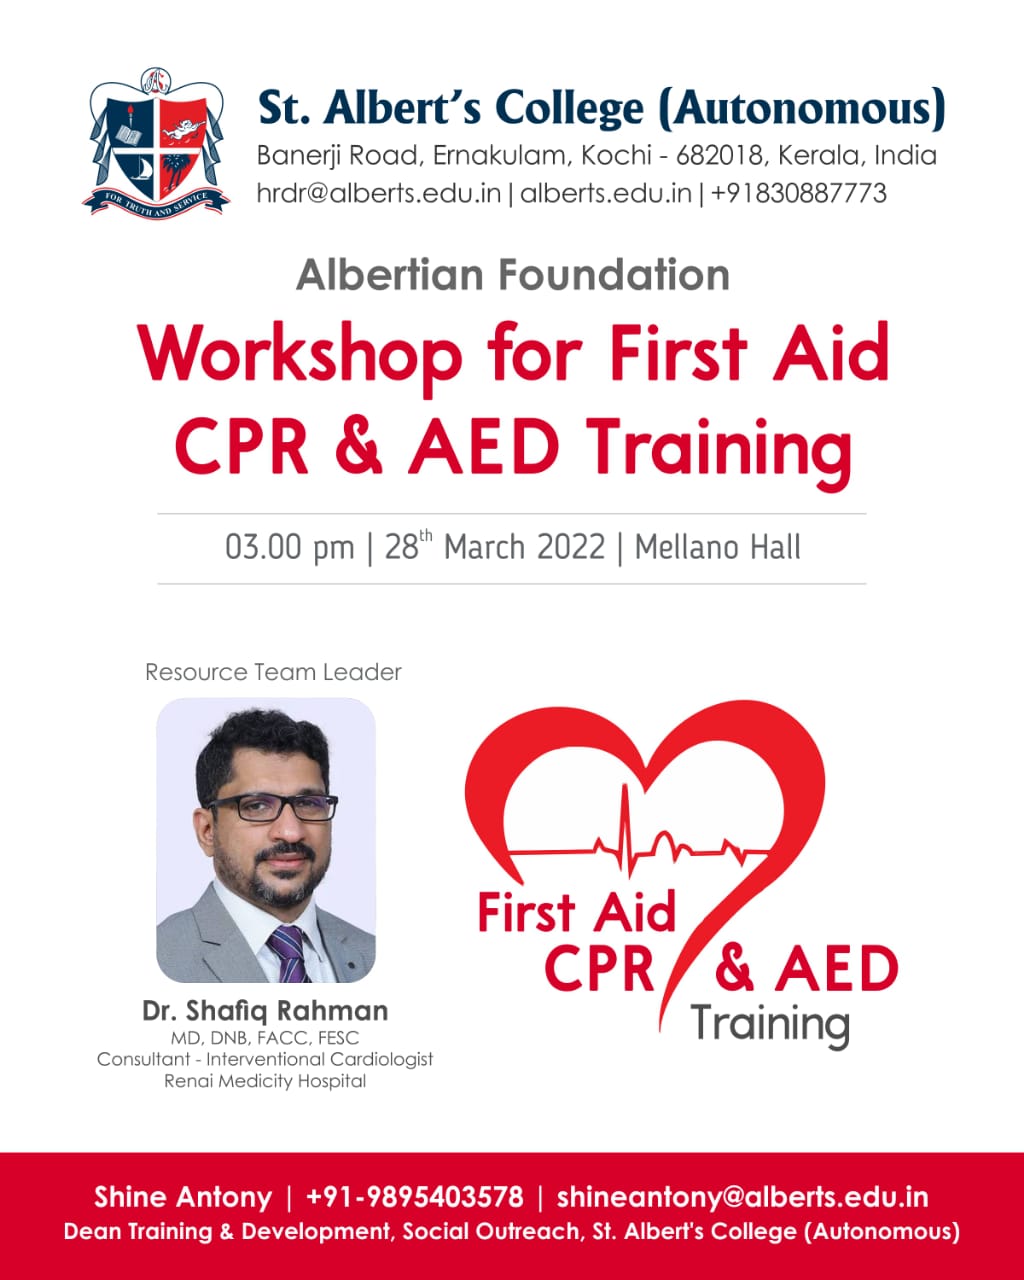 One Day Workshop for First Aid, CPR & AED Training